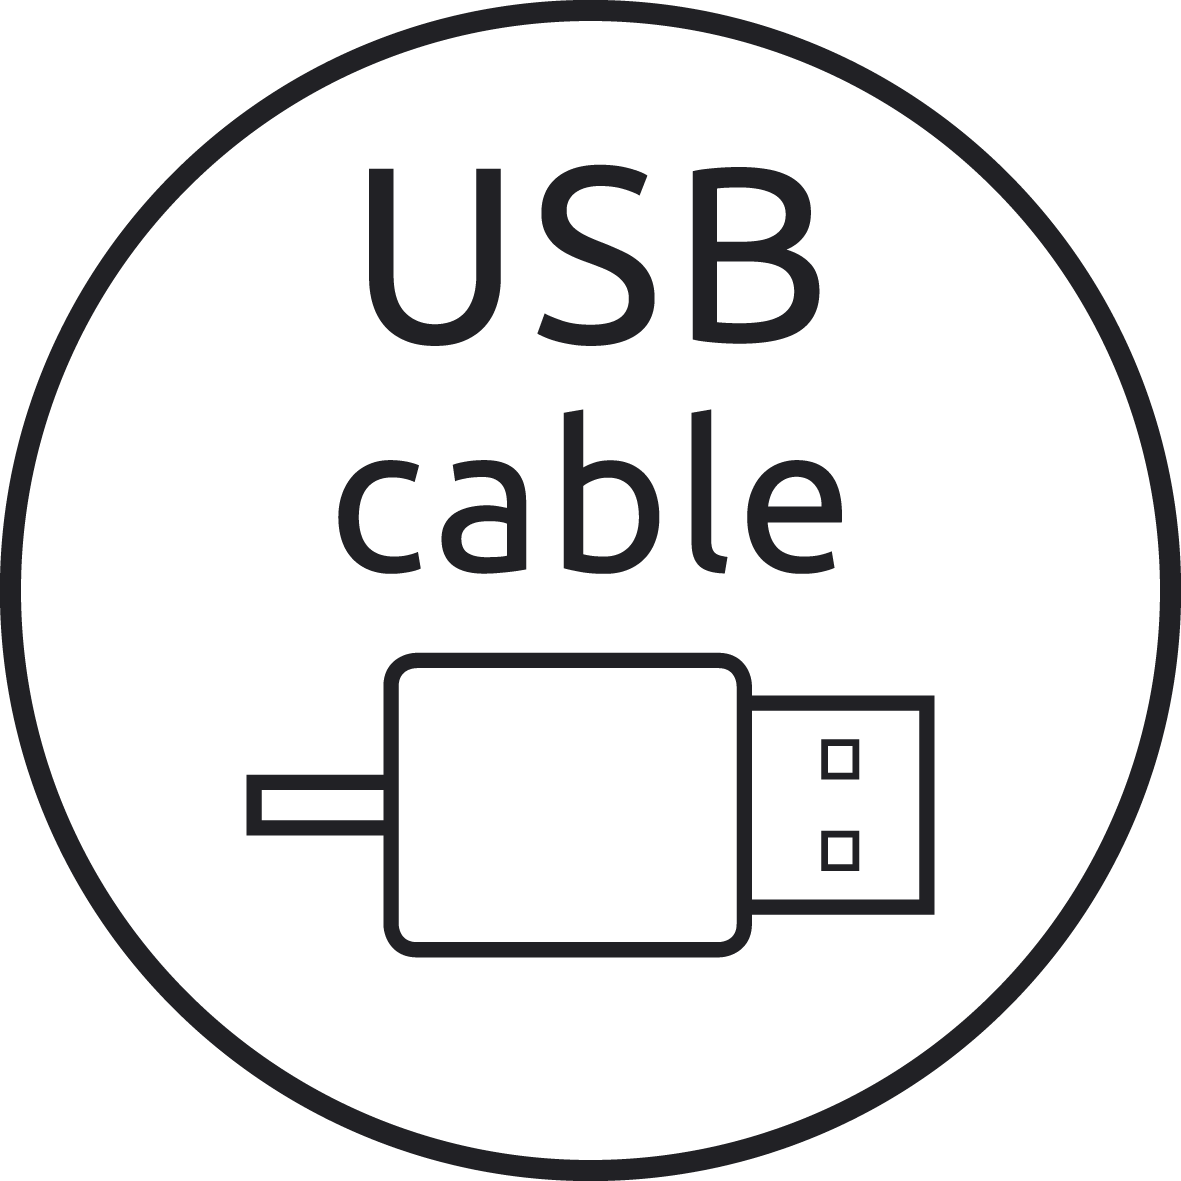 USBCABLE